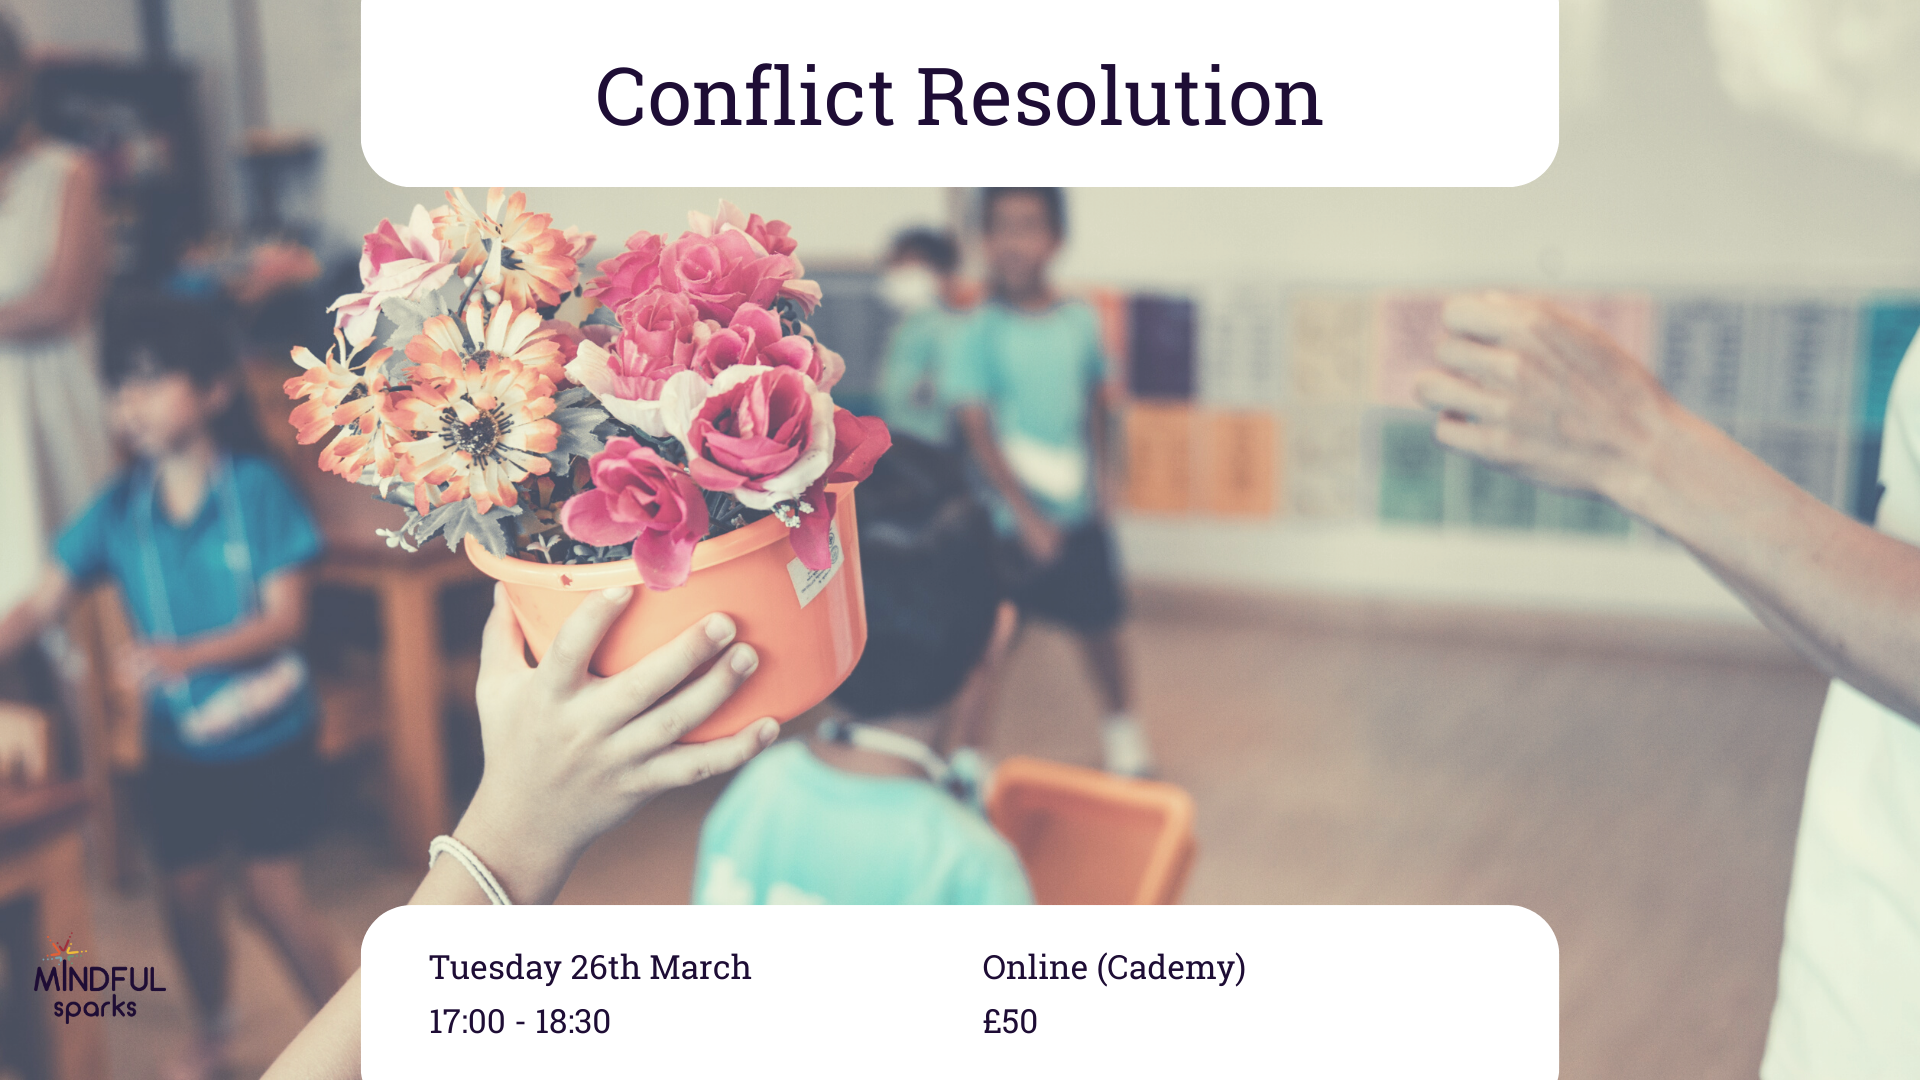 Conflict Resolution - The Classroom Edition